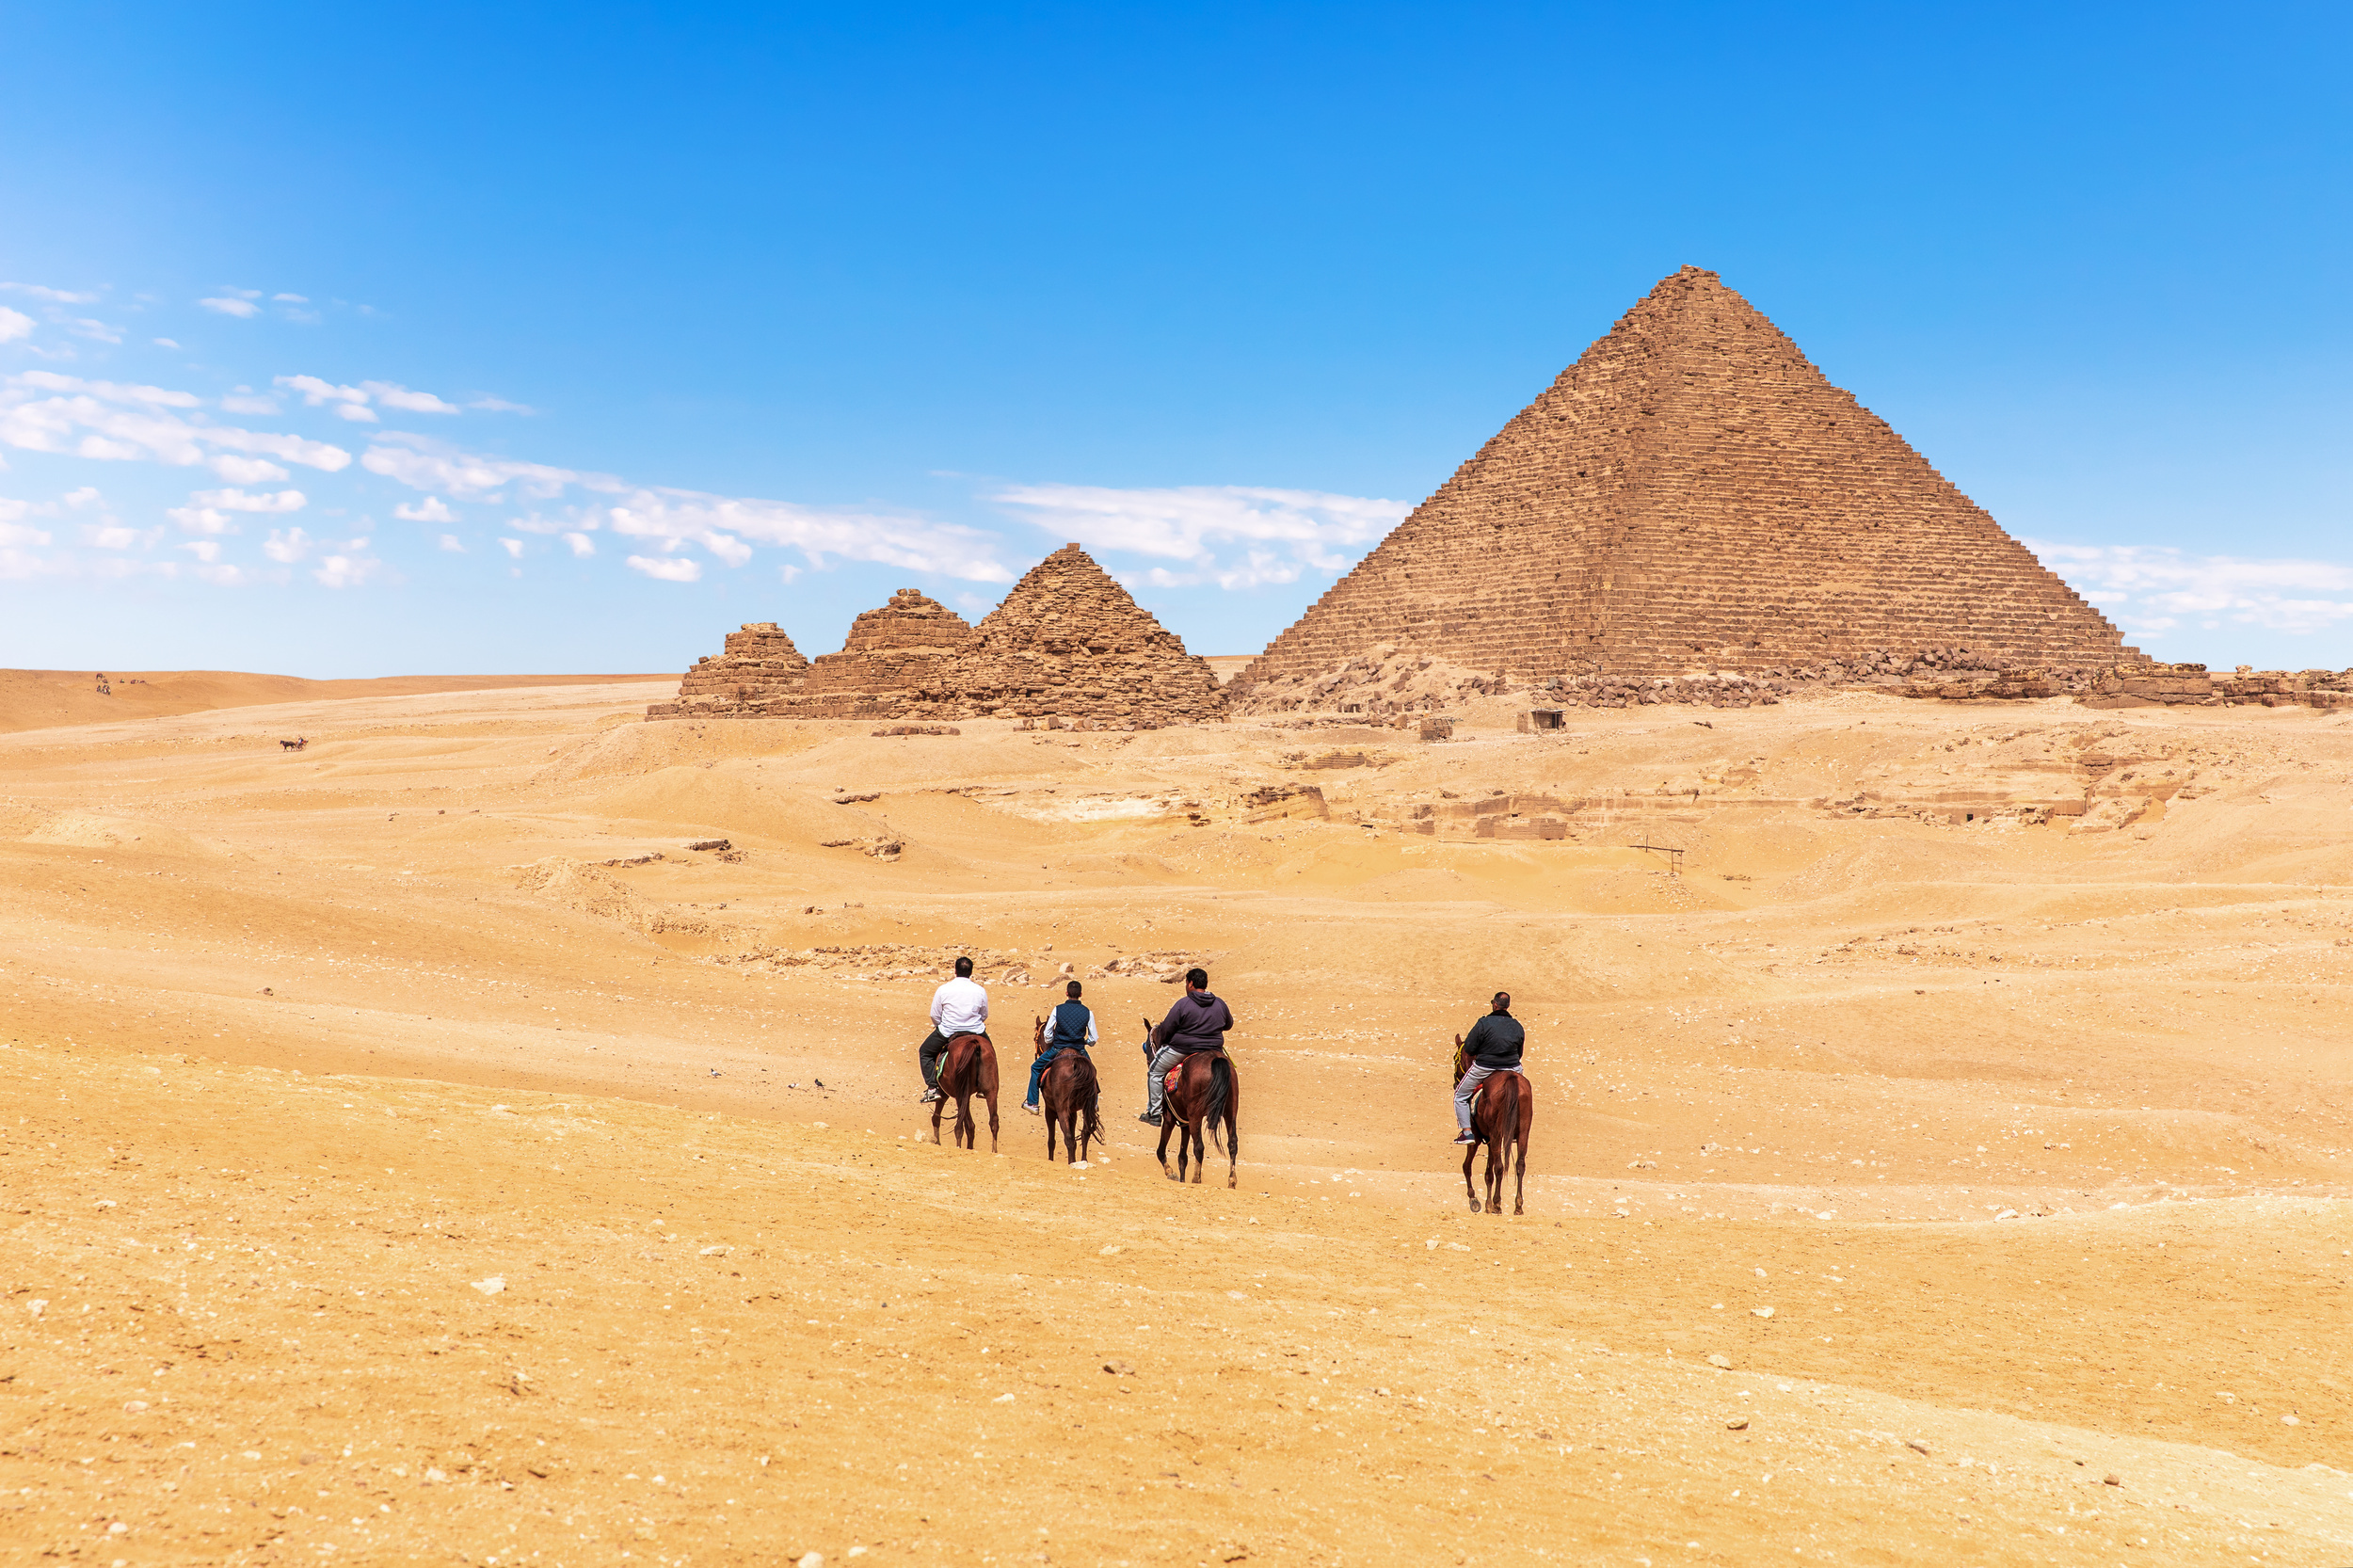 <p>Cairo houses one of the main wonders of the world: the pyramids. And every year, millions flock to see them, so if you want to avoid crowds and experience this site in a new way, take a riding tour. Plenty of barns outside of Cairo offer excursions on a daily basis, and it’s definitely worth doing!</p><p><a href='https://www.msn.com/en-us/community/channel/vid-cj9pqbr0vn9in2b6ddcd8sfgpfq6x6utp44fssrv6mc2gtybw0us'>Follow us on MSN to see more of our exclusive lifestyle content.</a></p>